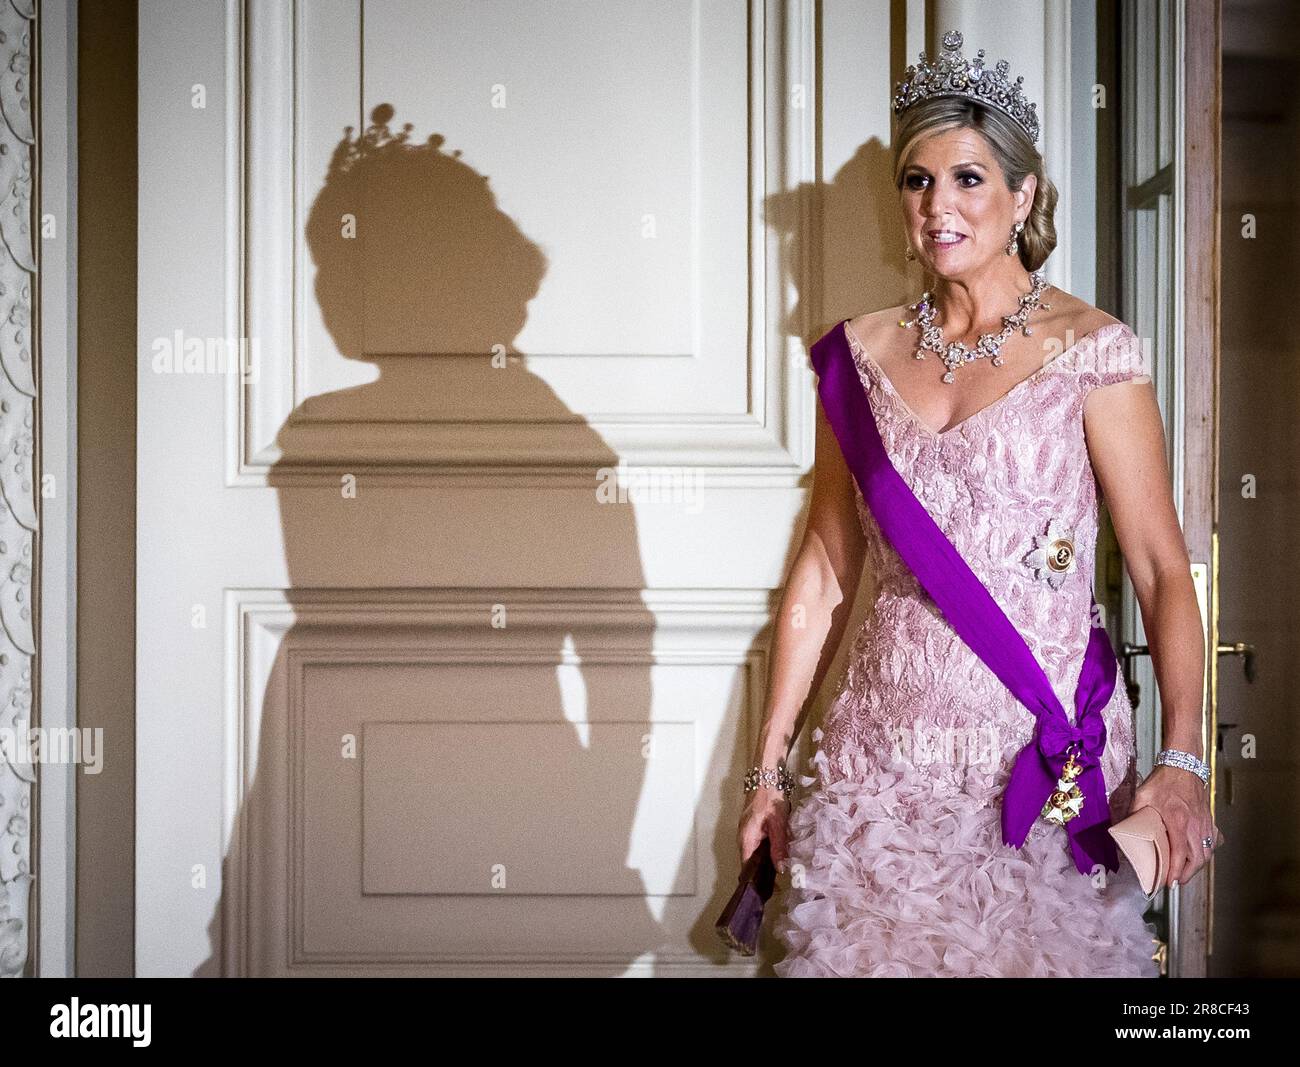 BRUSSELS - Queen Maxima prior to the state banquet at the Castle of Laeken  on the first day of the state visit to Belgium. The royal couple will visit  the country, at